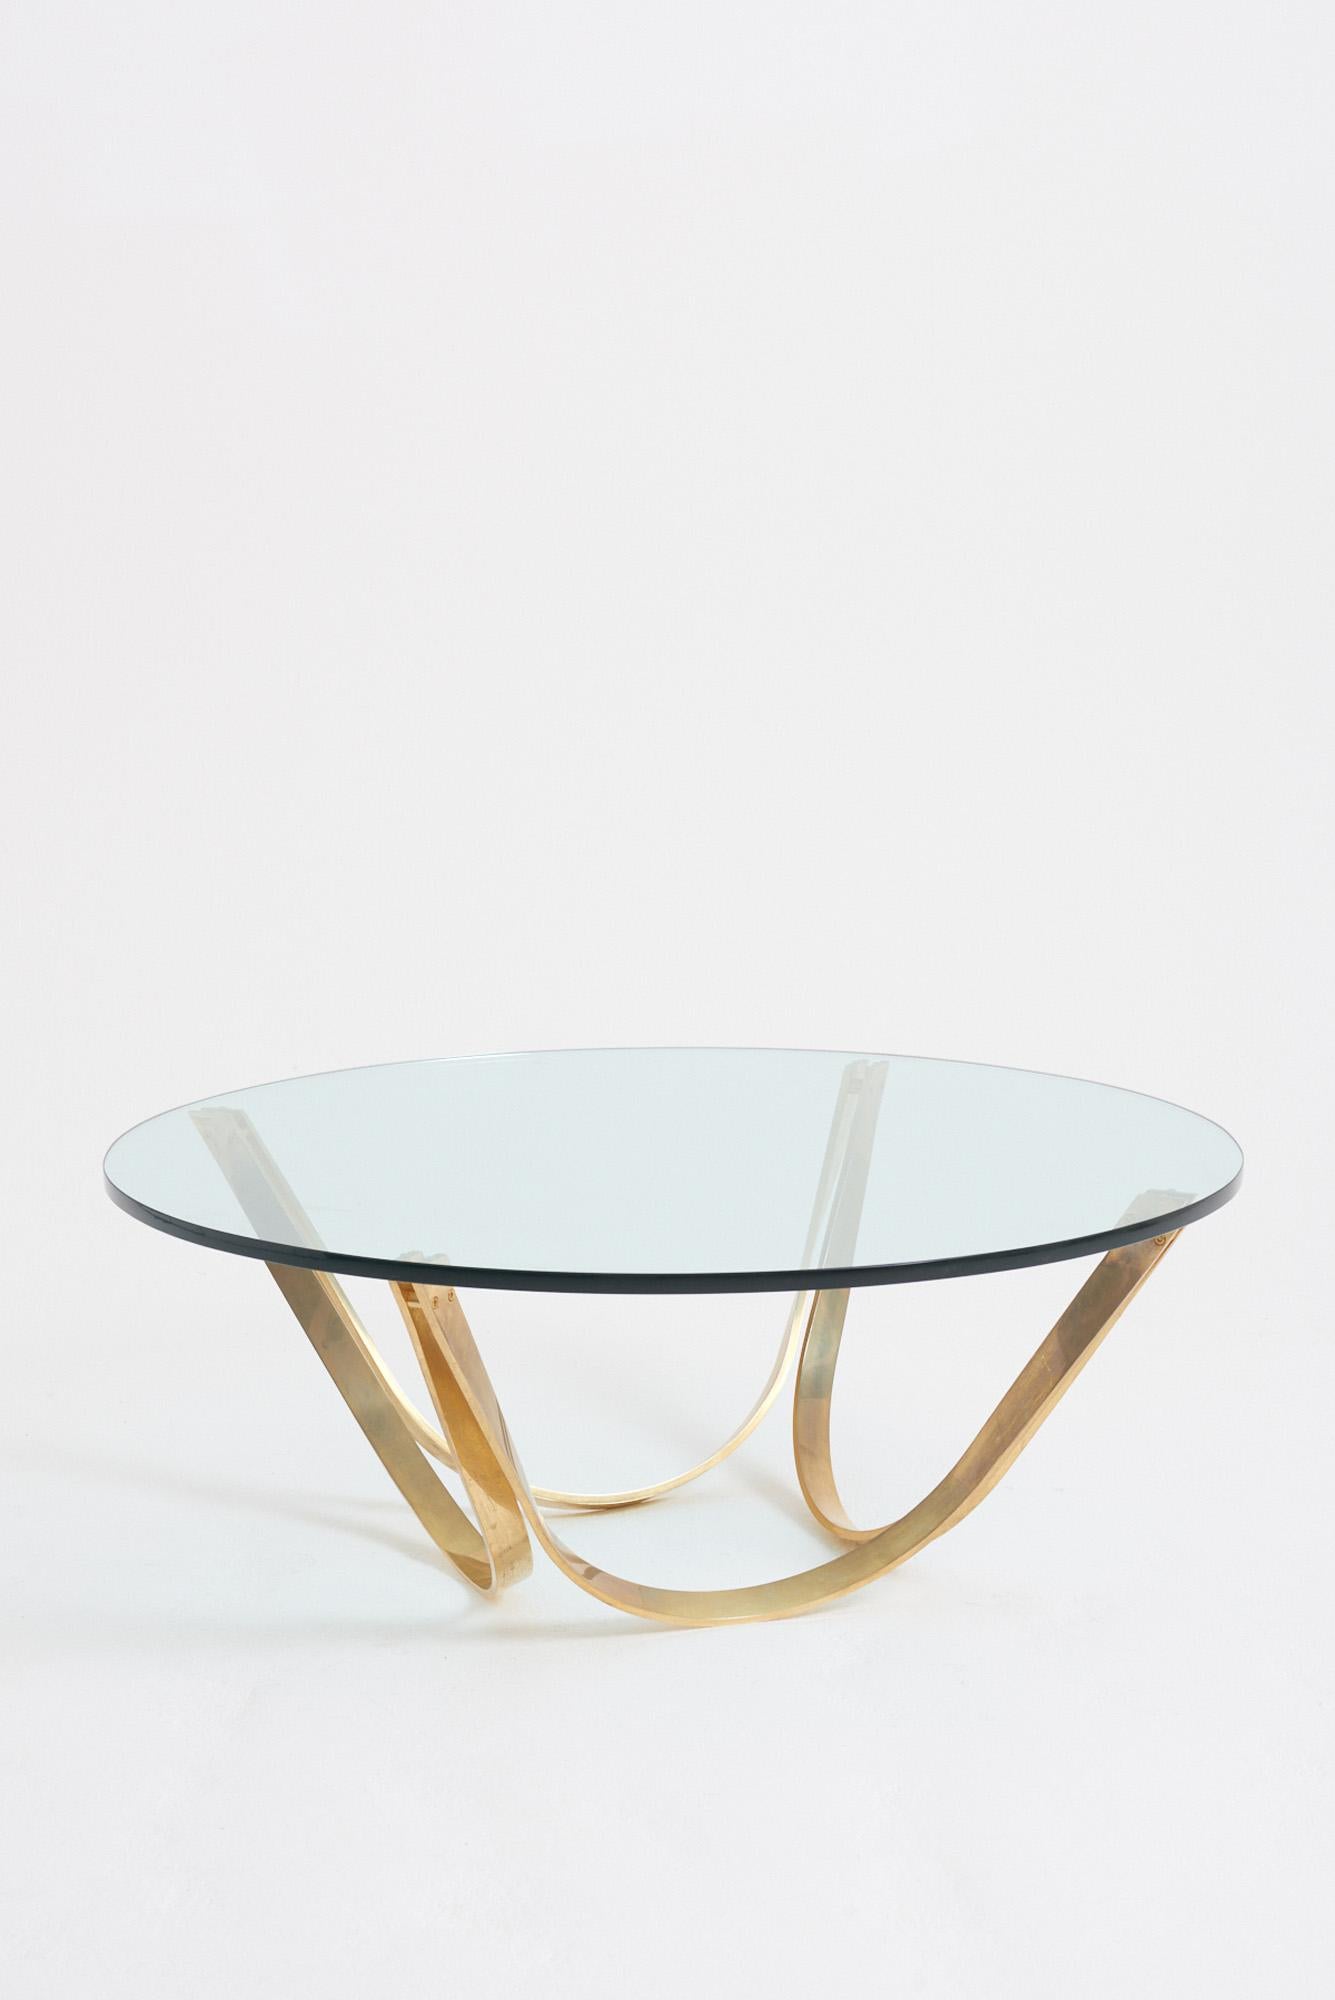 A gilt lacquered steel and glass top circular coffee table.
Sweden, 1970s